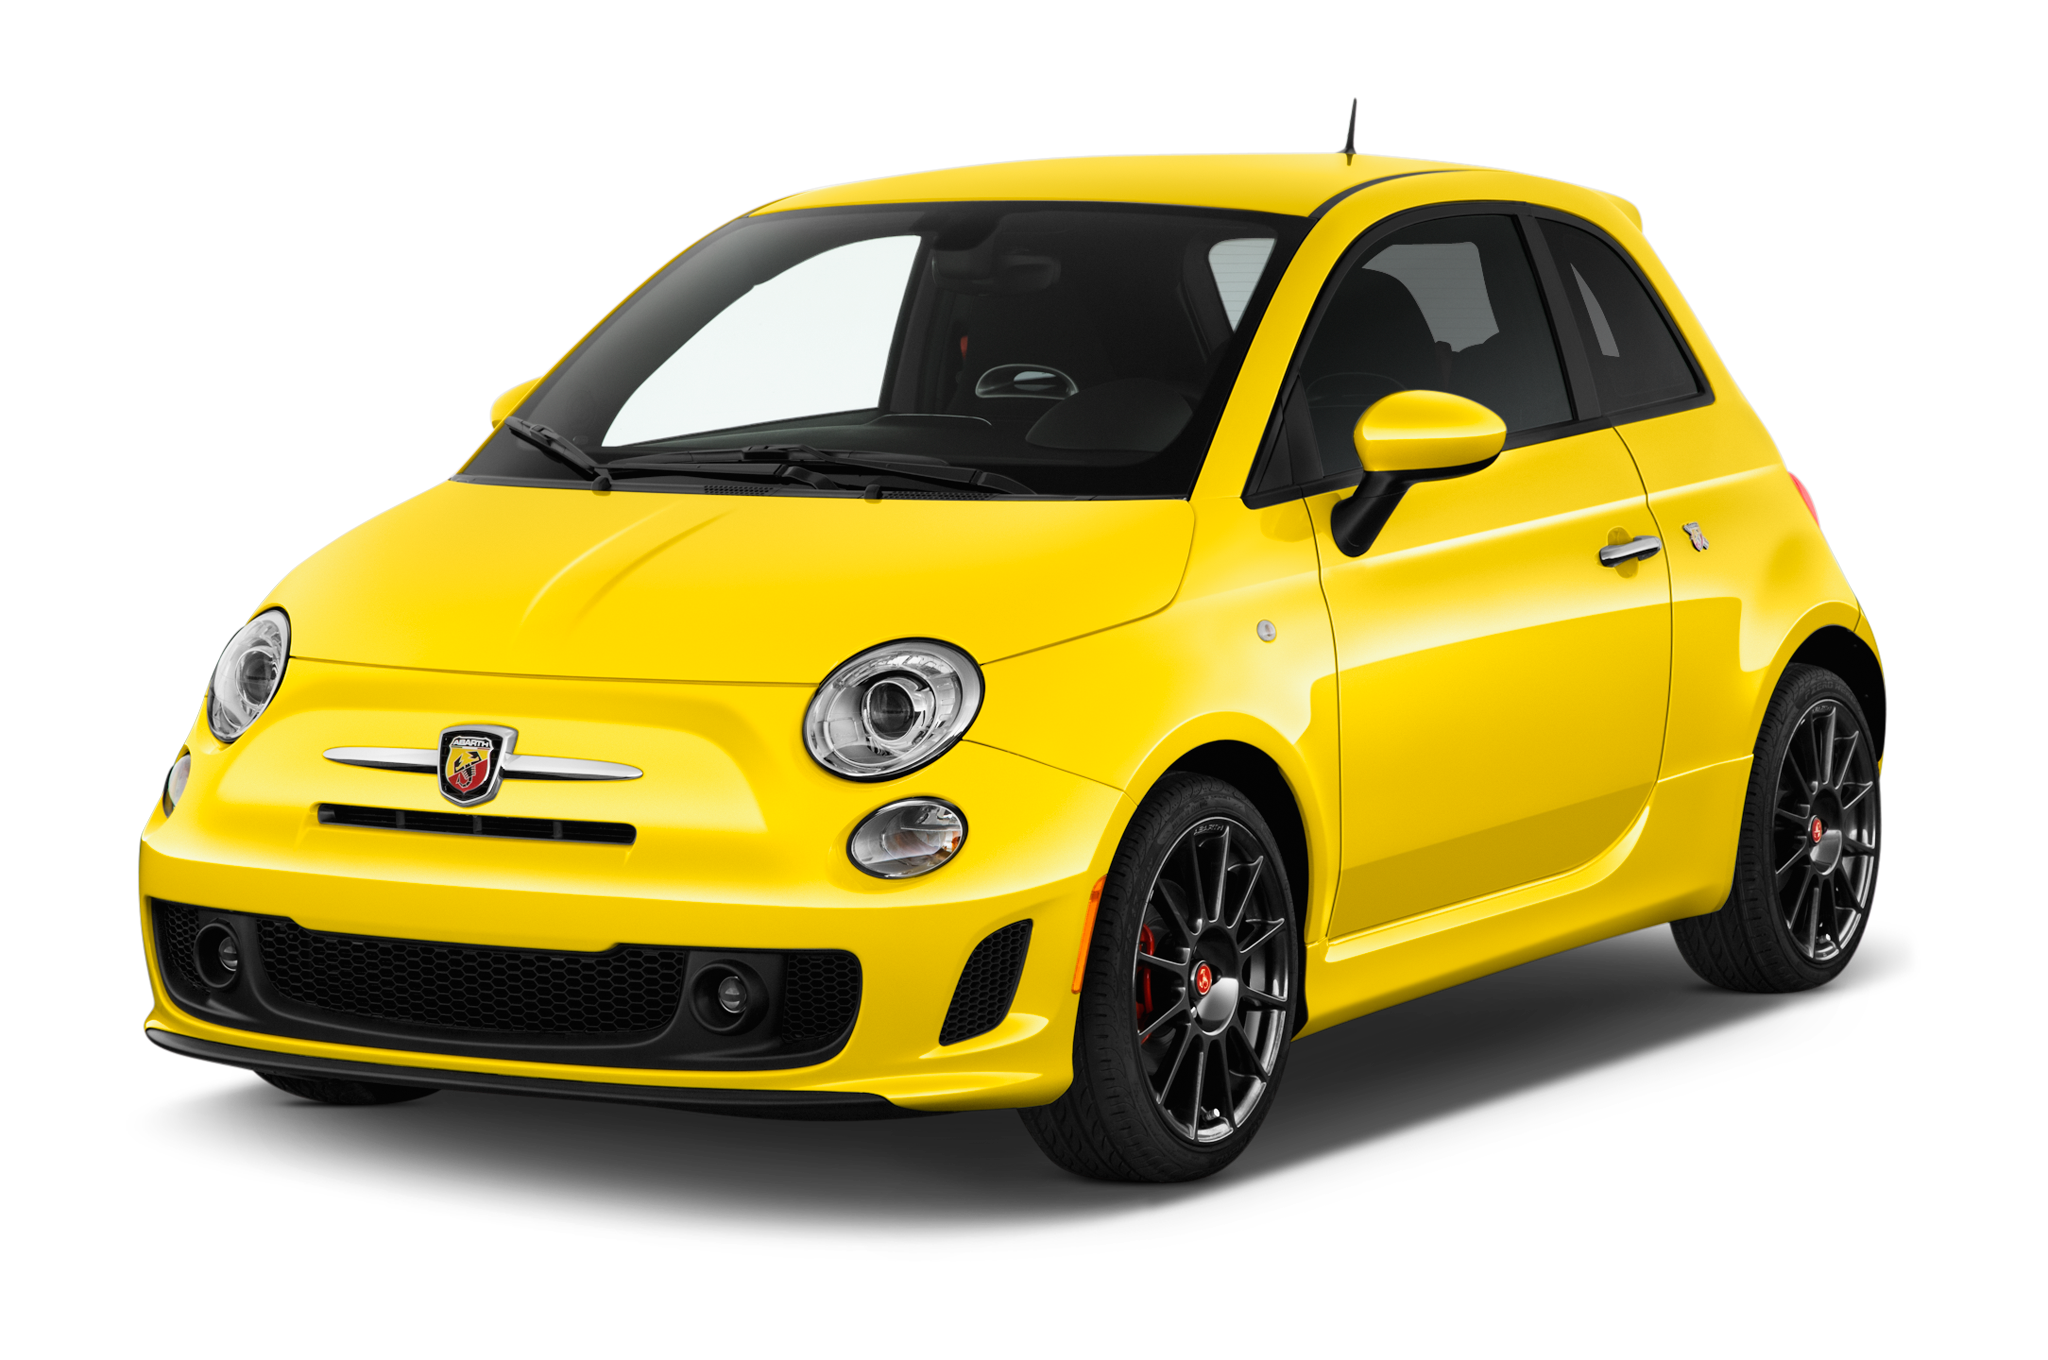 Fiat 500 Abarth 2017 International Price And Overview